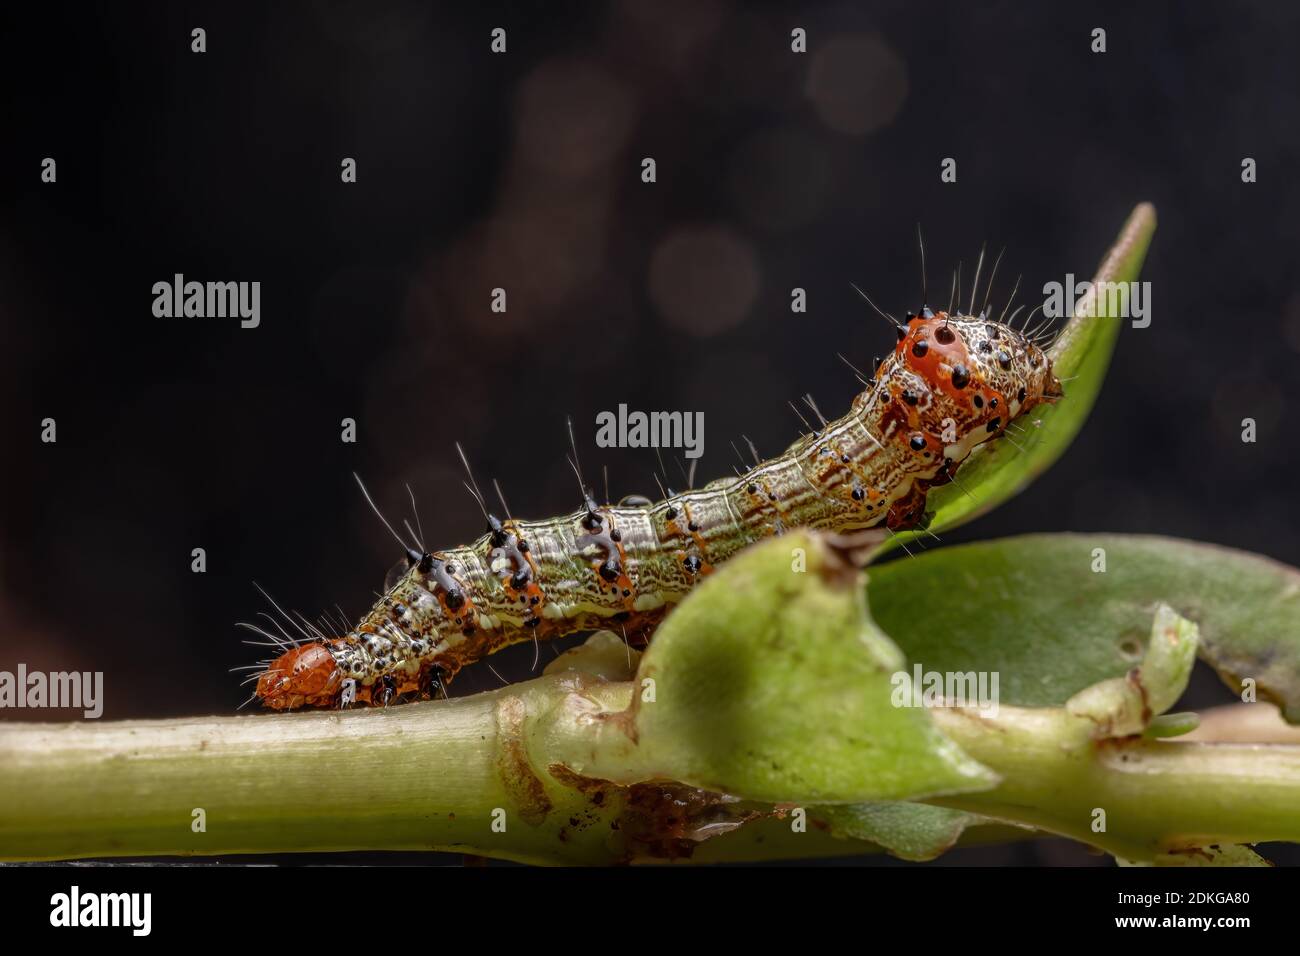 Caterpillar of the order lepidoptera eating a Common Purslane plant of the species Portulaca oleracea Stock Photo